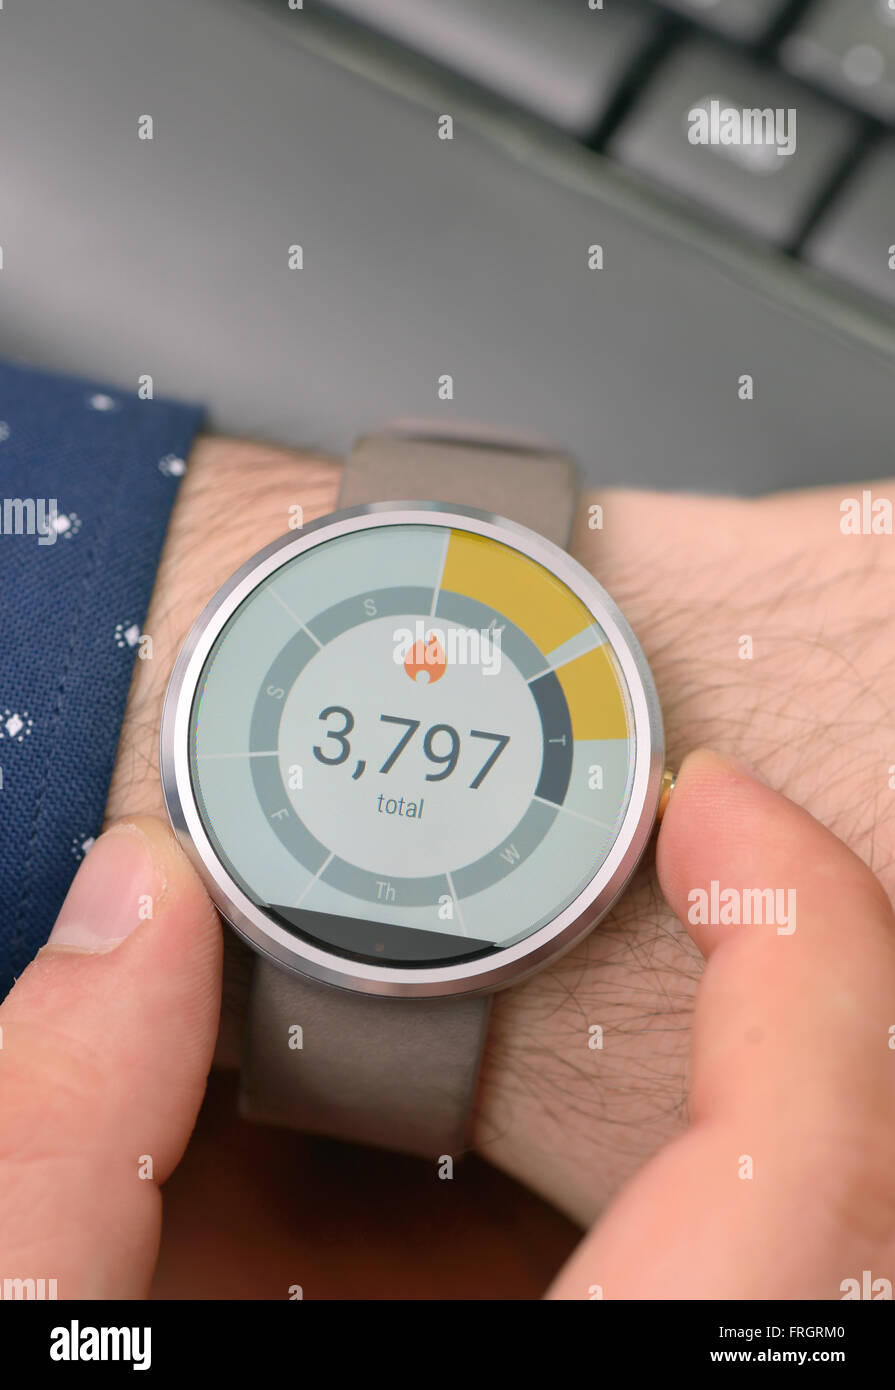 Calorie Counter on Smart Watch Stock Photo